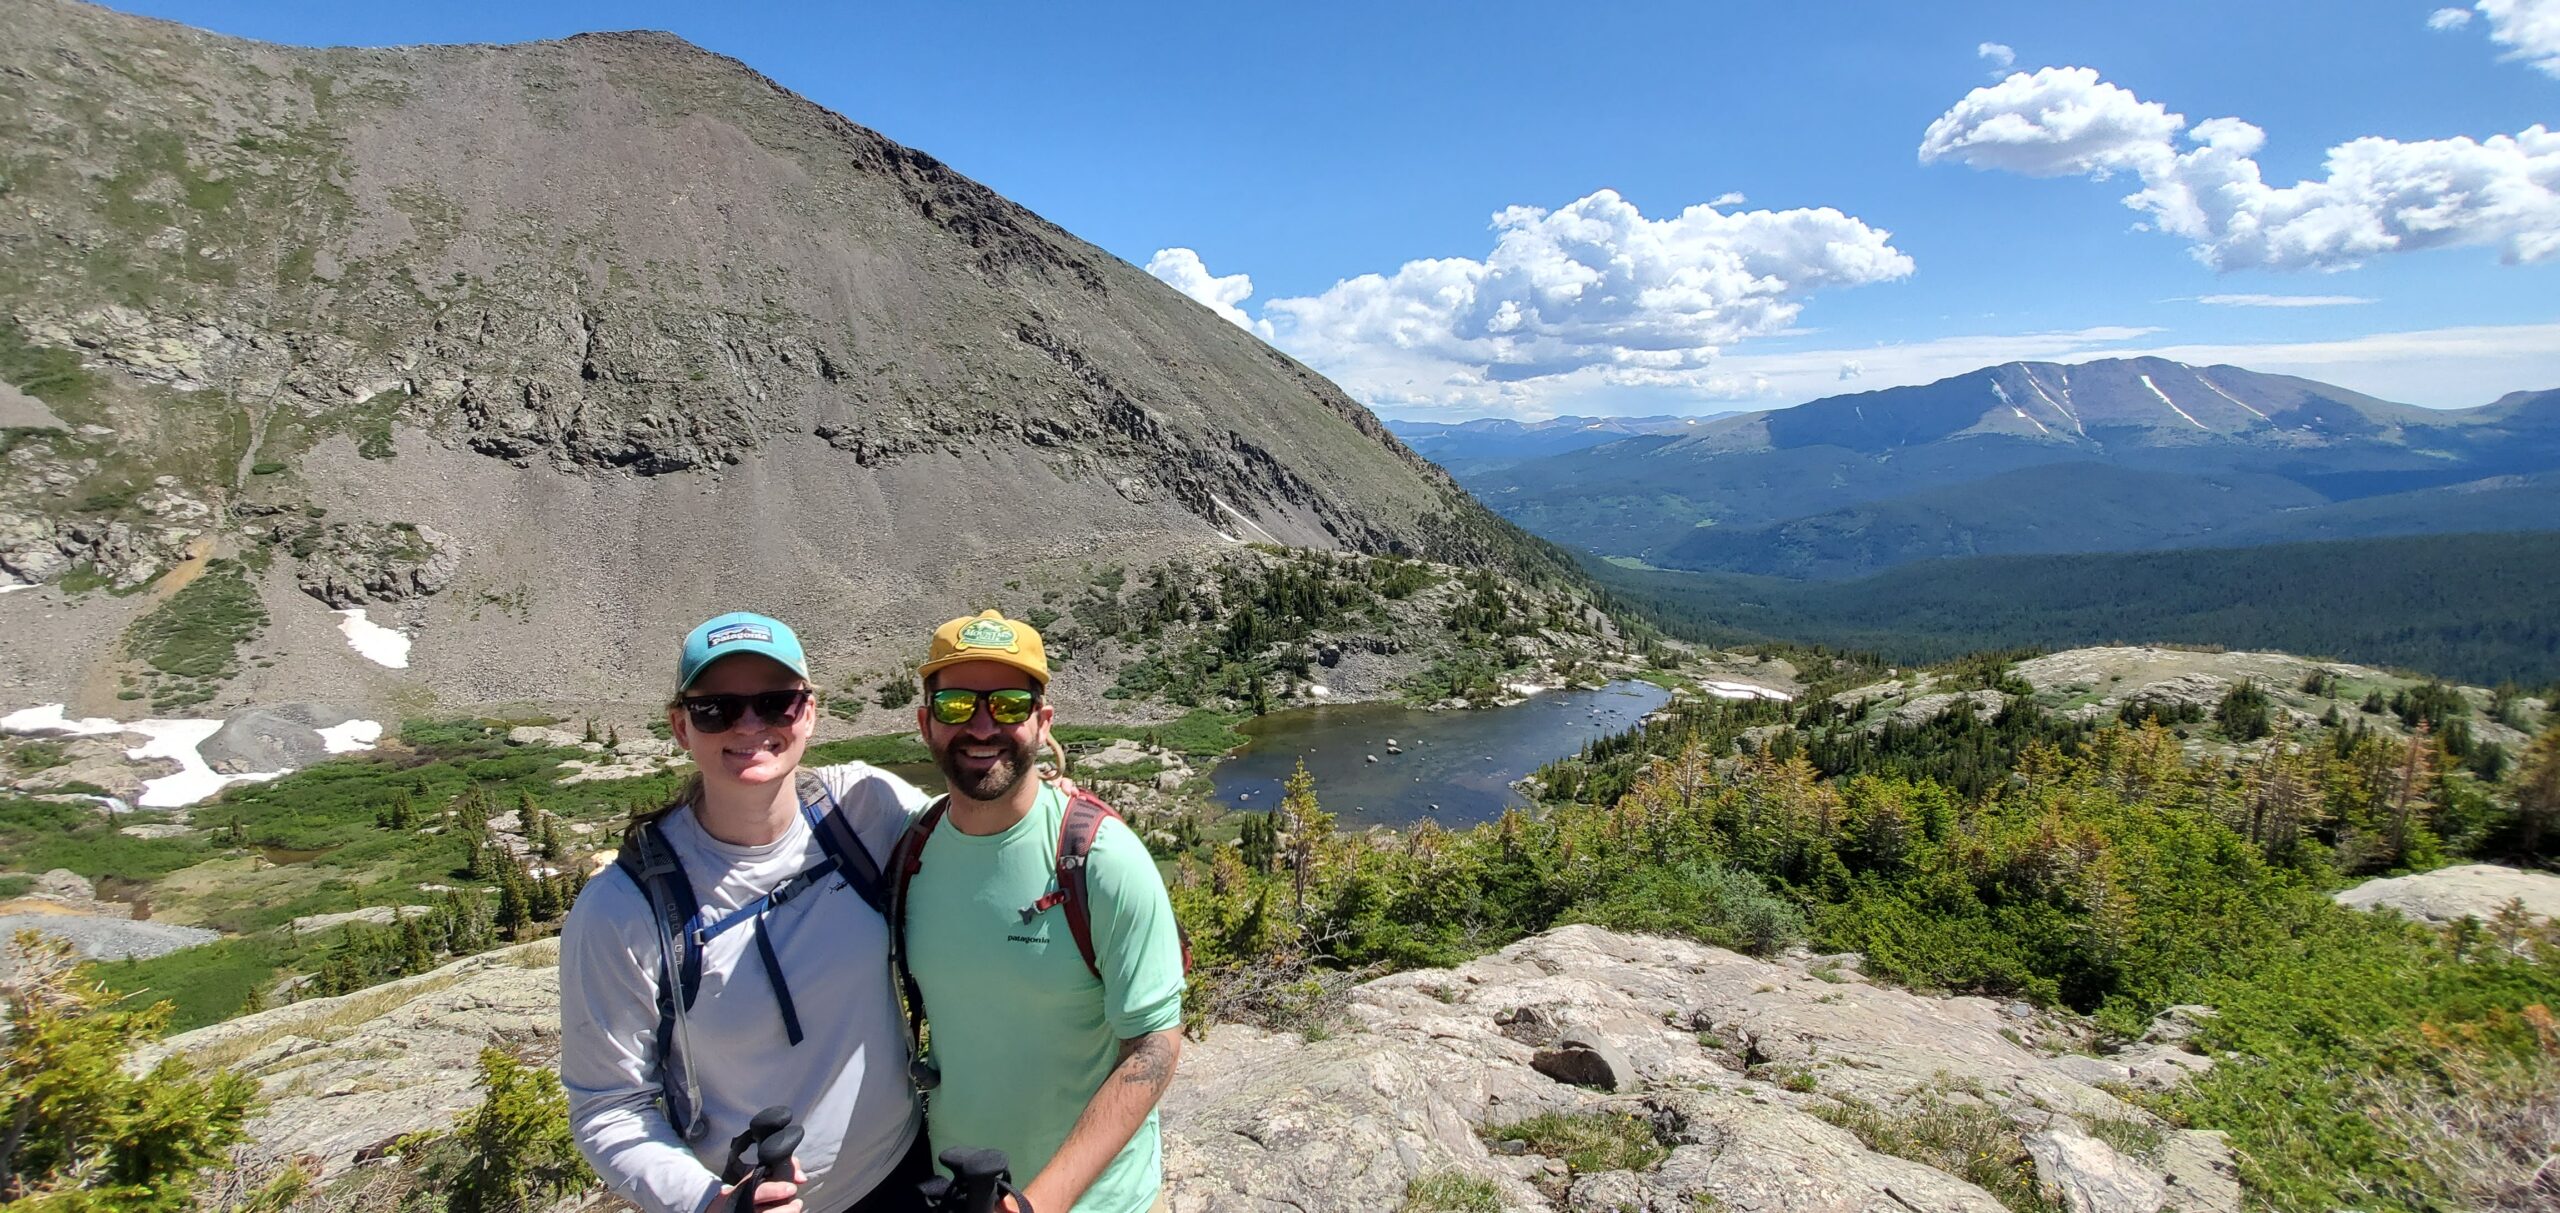 Hiking Mohawk Lakes is one of the best Breckenridge summer activities